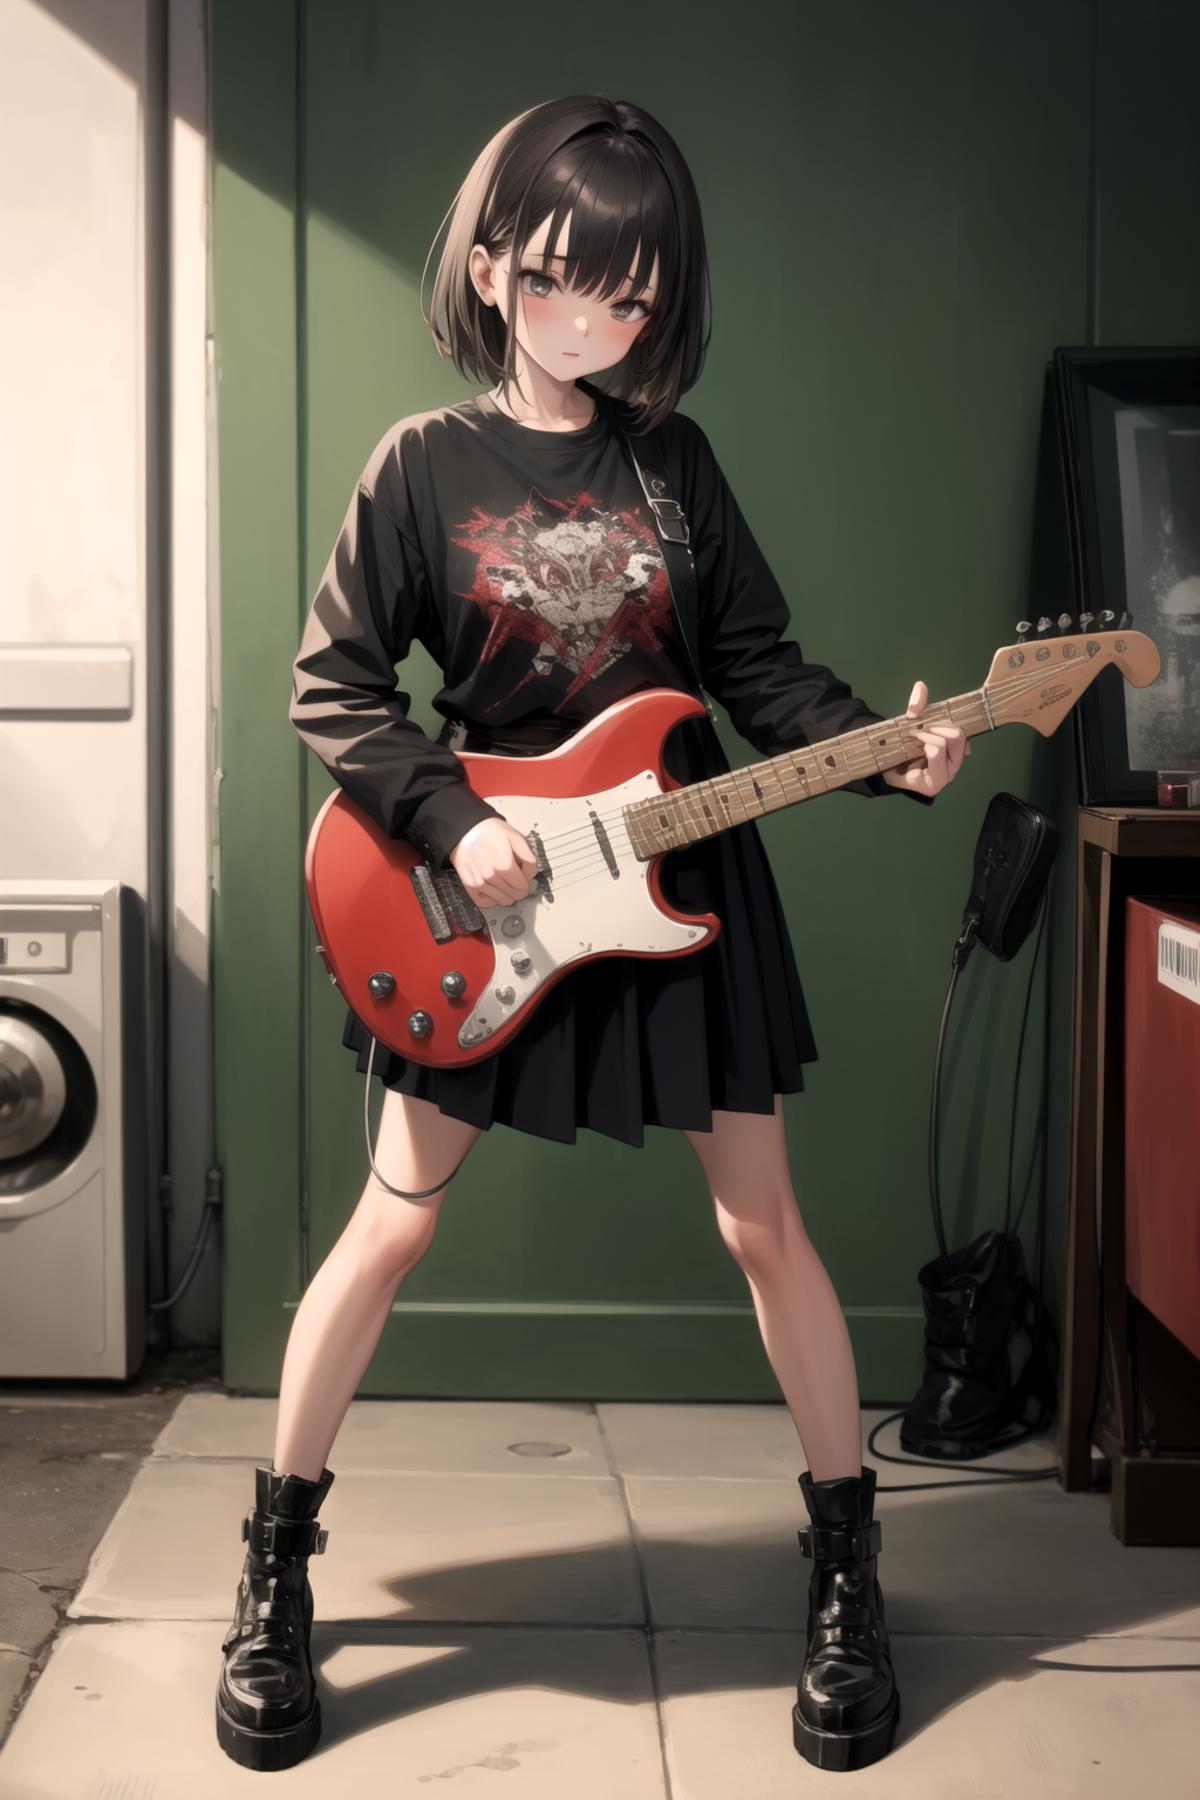 Girl in a black dress holding a red guitar.